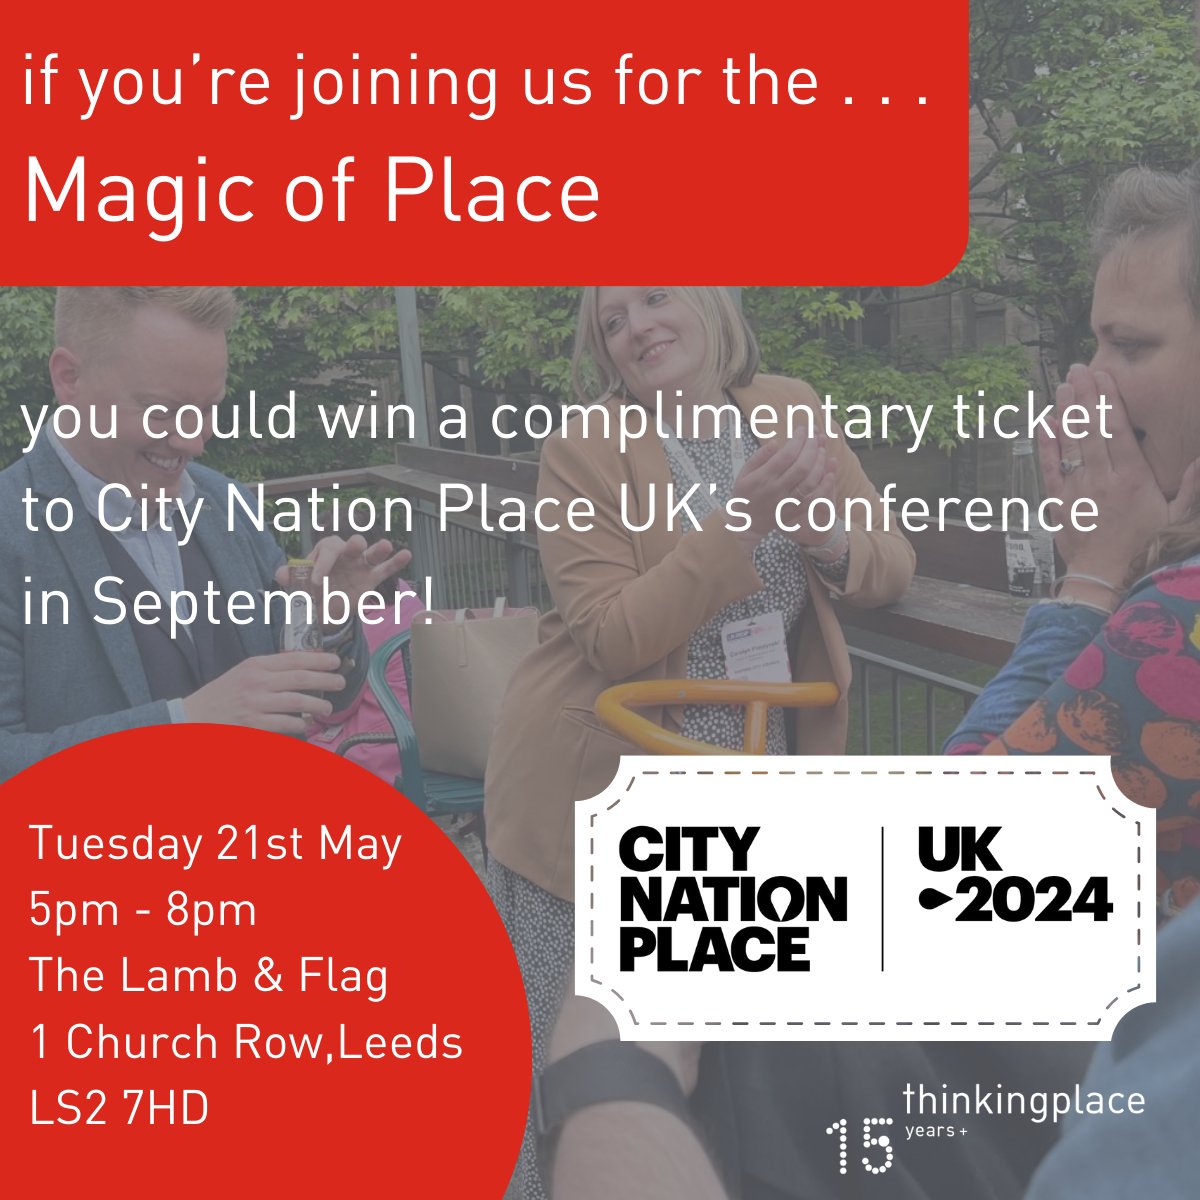 If you're attending our 'Magic of Place' drinks event during UKREiiF, you'll be in with a chance of winning a ticket to City Nation Place UK in September citynationplace.com/uk. Winner will be announced on the evening so you've got to be in it to win it➡️bit.ly/3IT5HvG